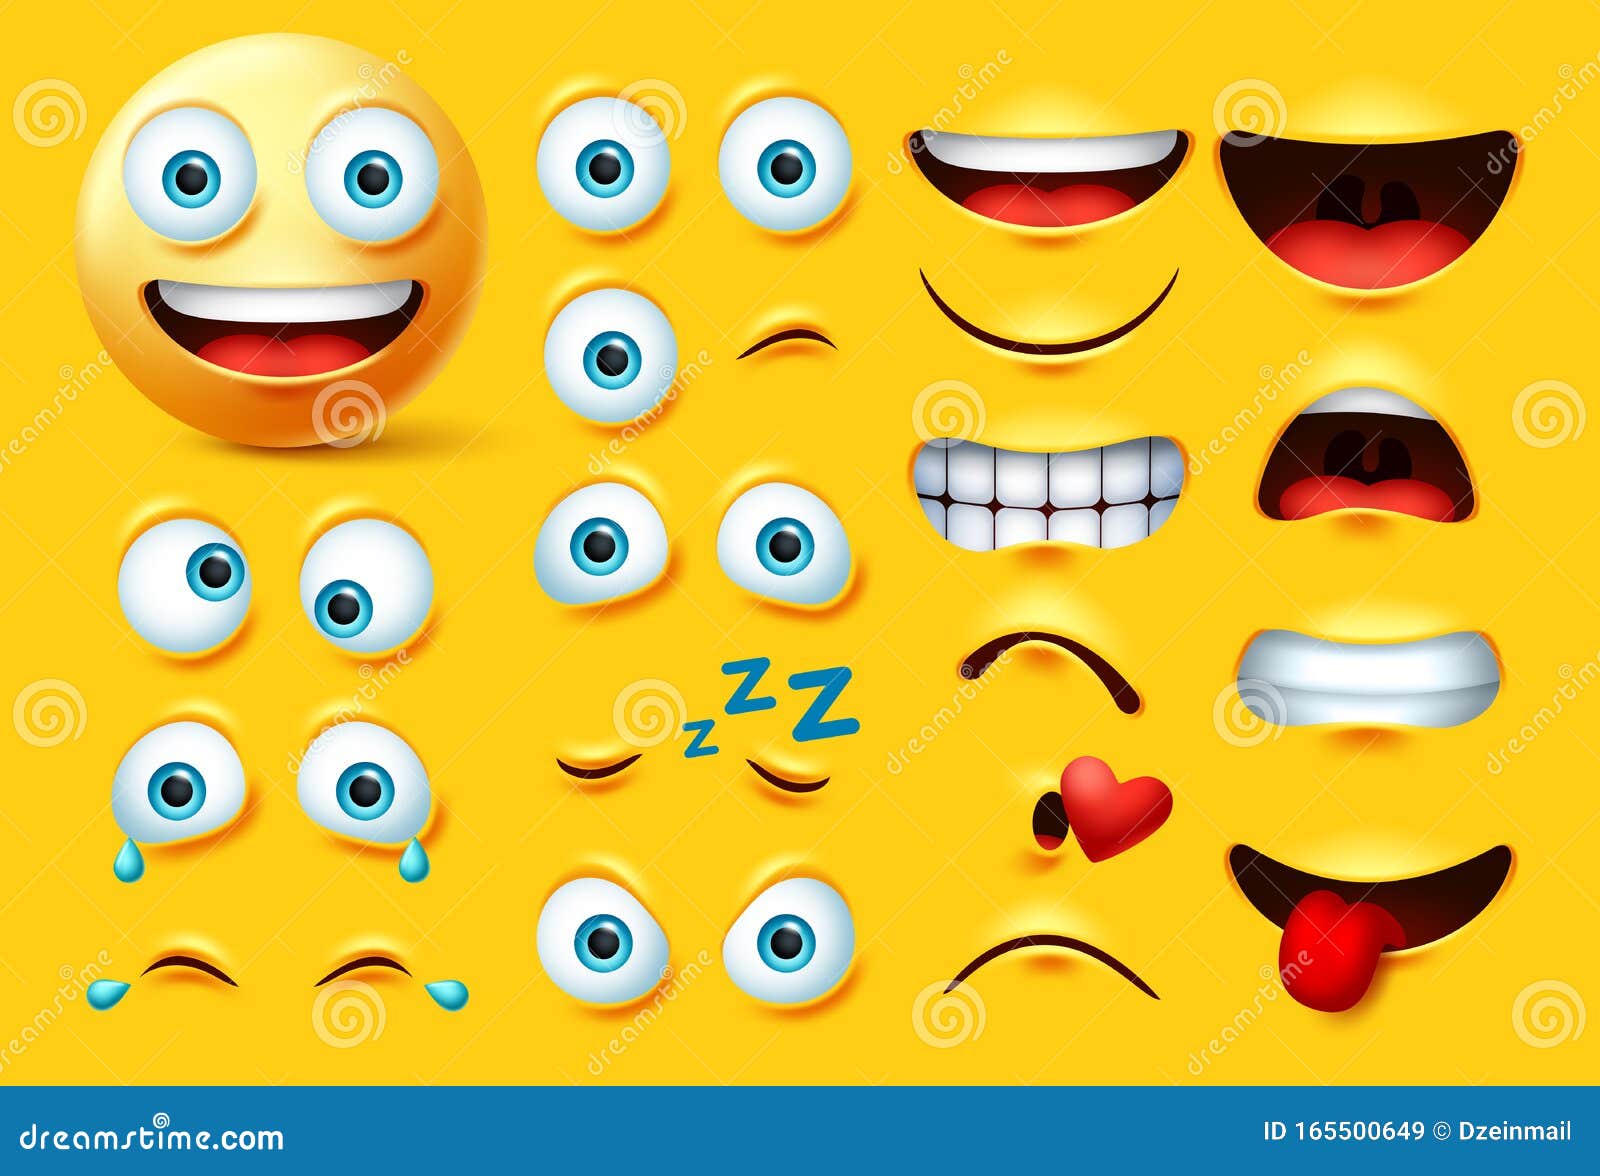 smileys emoticon character creation  set. smiley emoji face kit eyes and mouth in angry, crazy, crying, naughty, kissing.